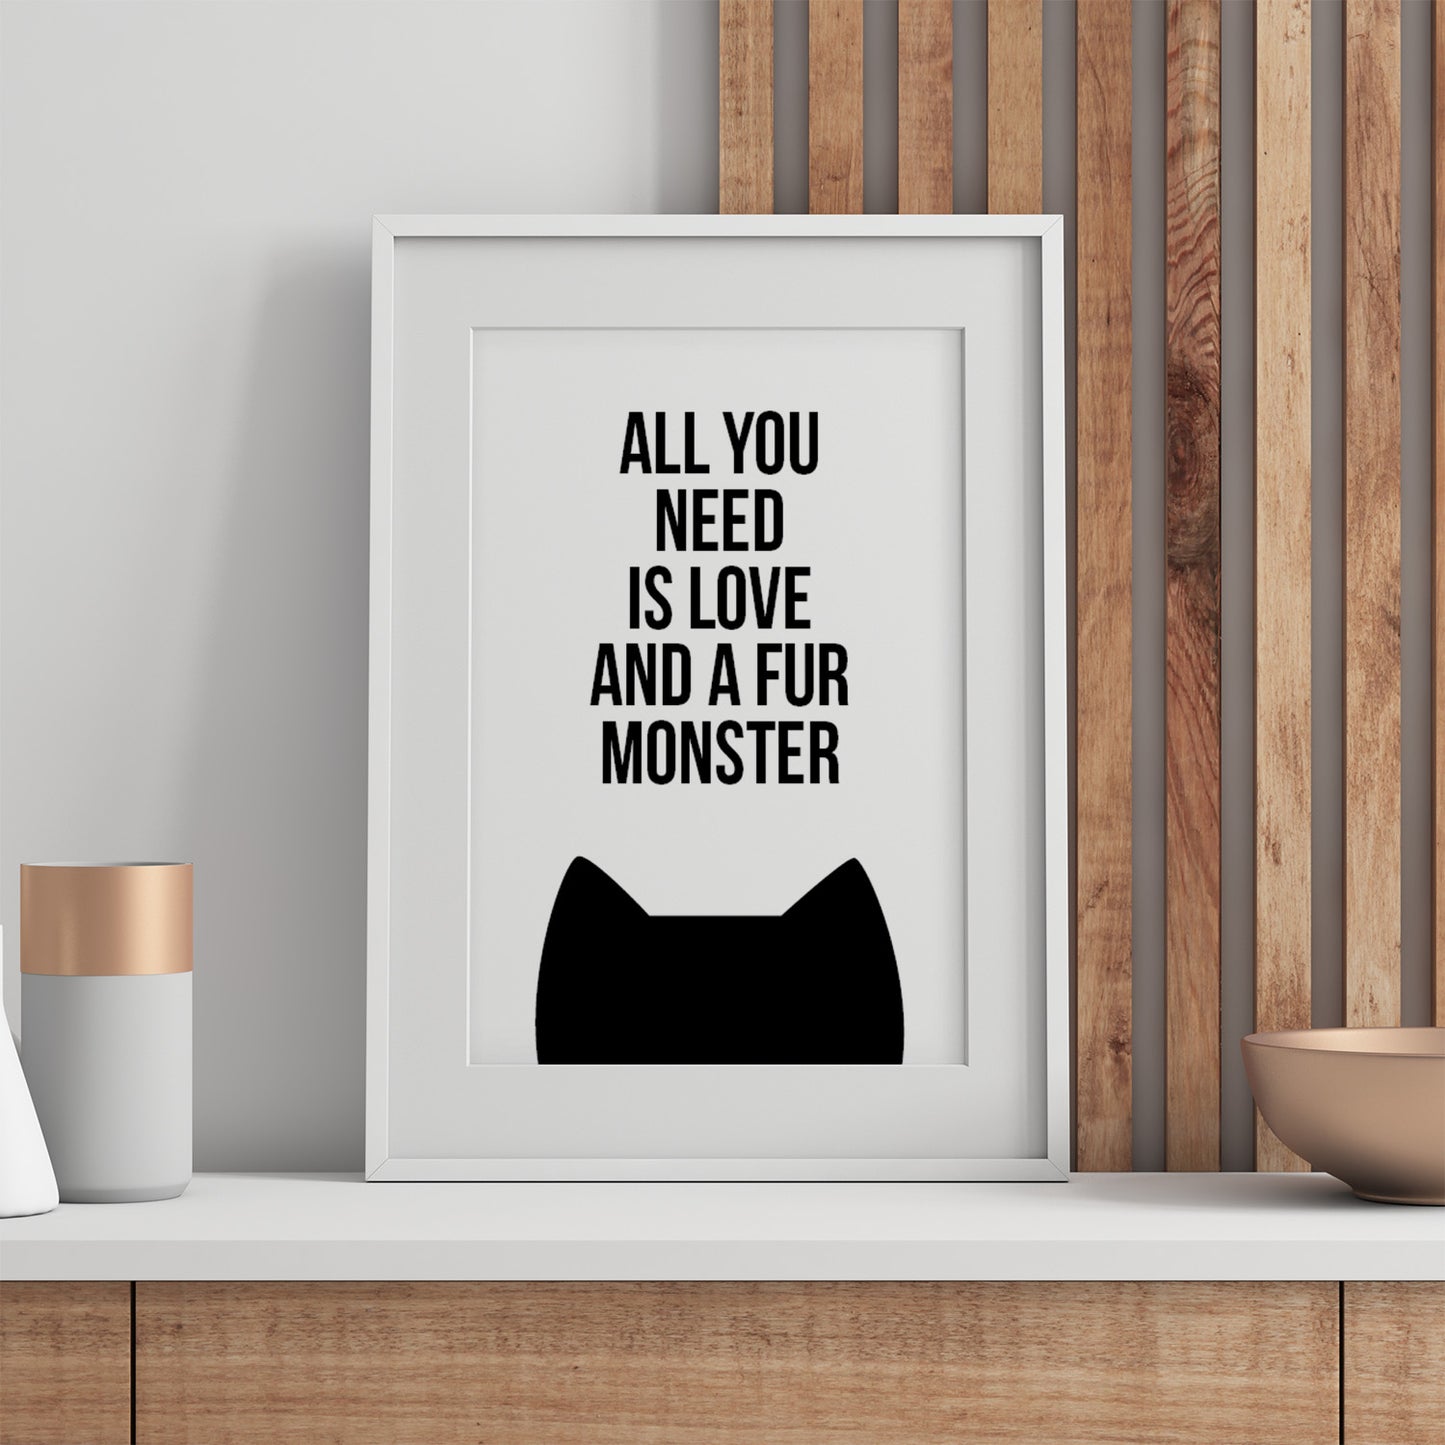 All you need is love and a fur monster cat print from Purple Tree Designs